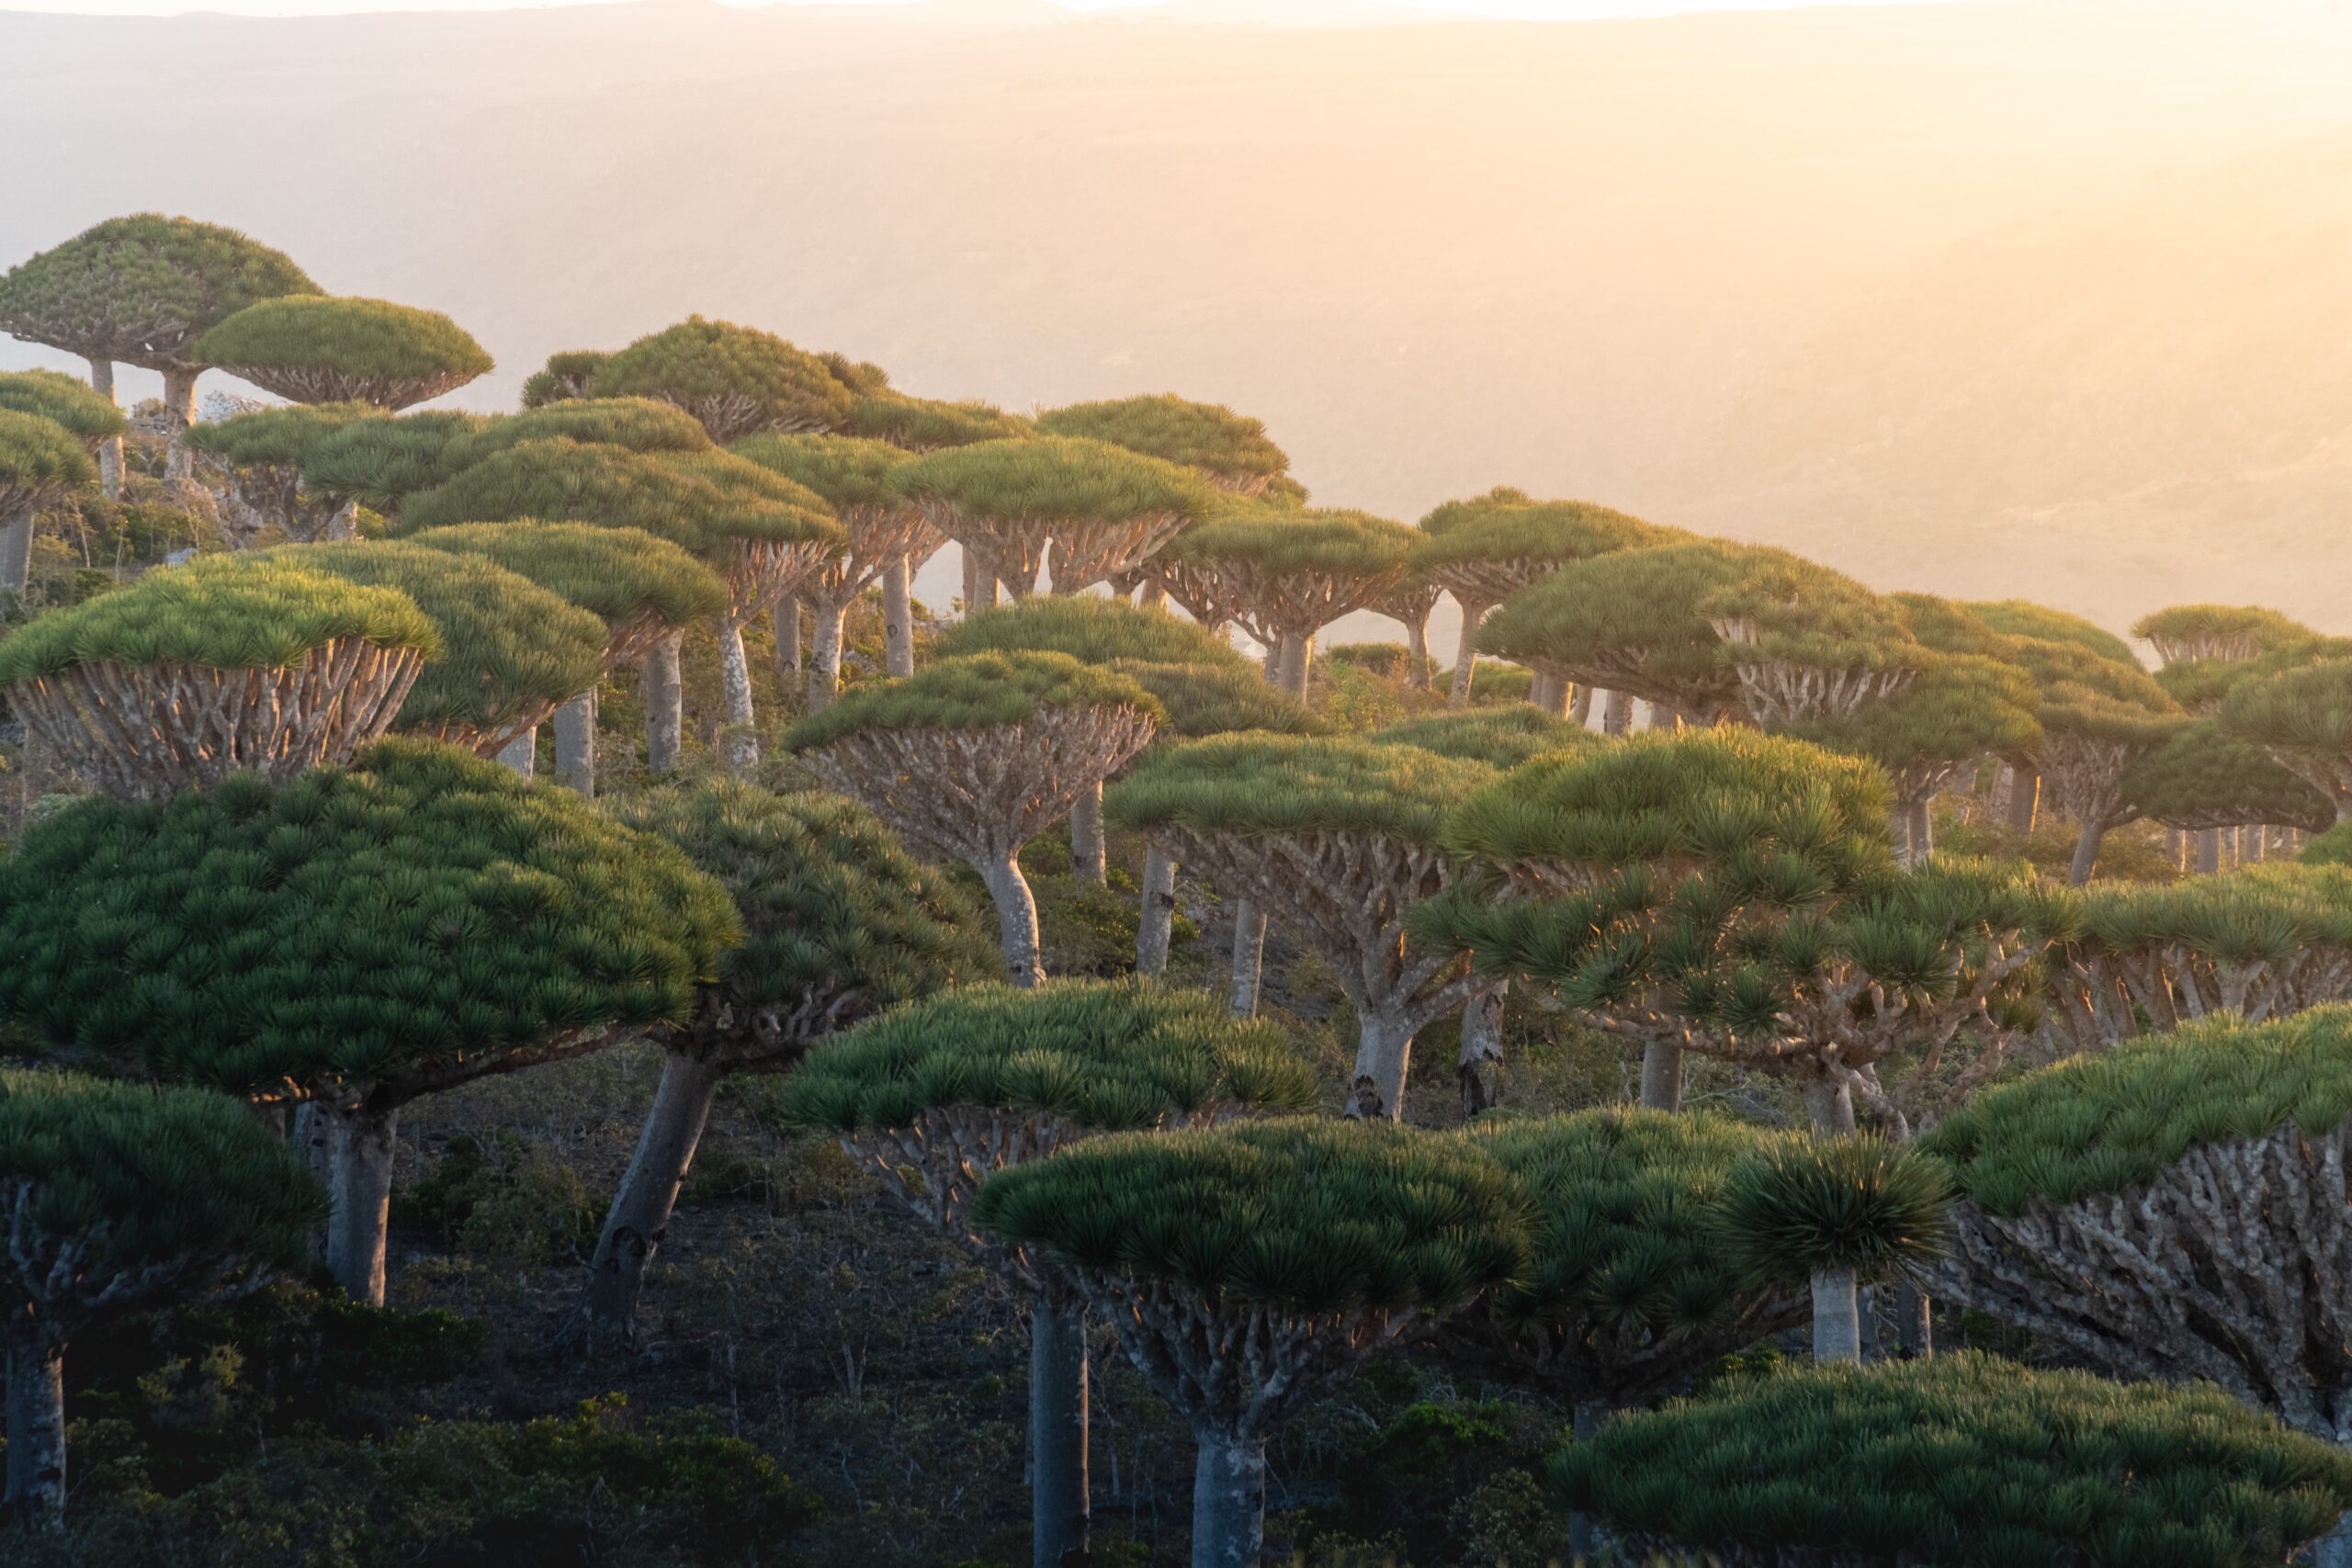 The Dragon Blood Trees can only be found on Socotra island